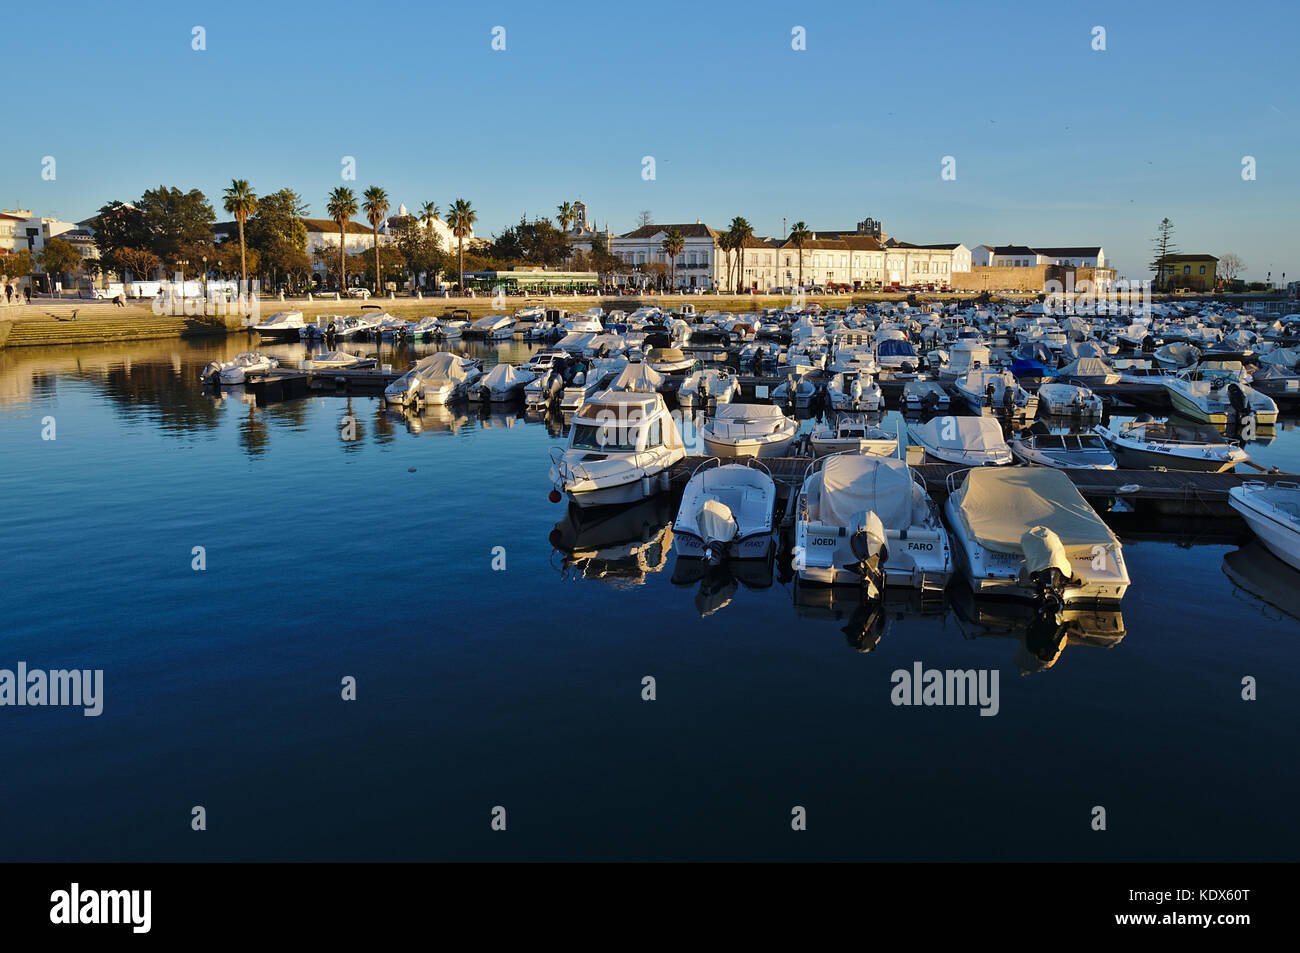 The Marina of Faro during afternoon. Portugal Stock Photo